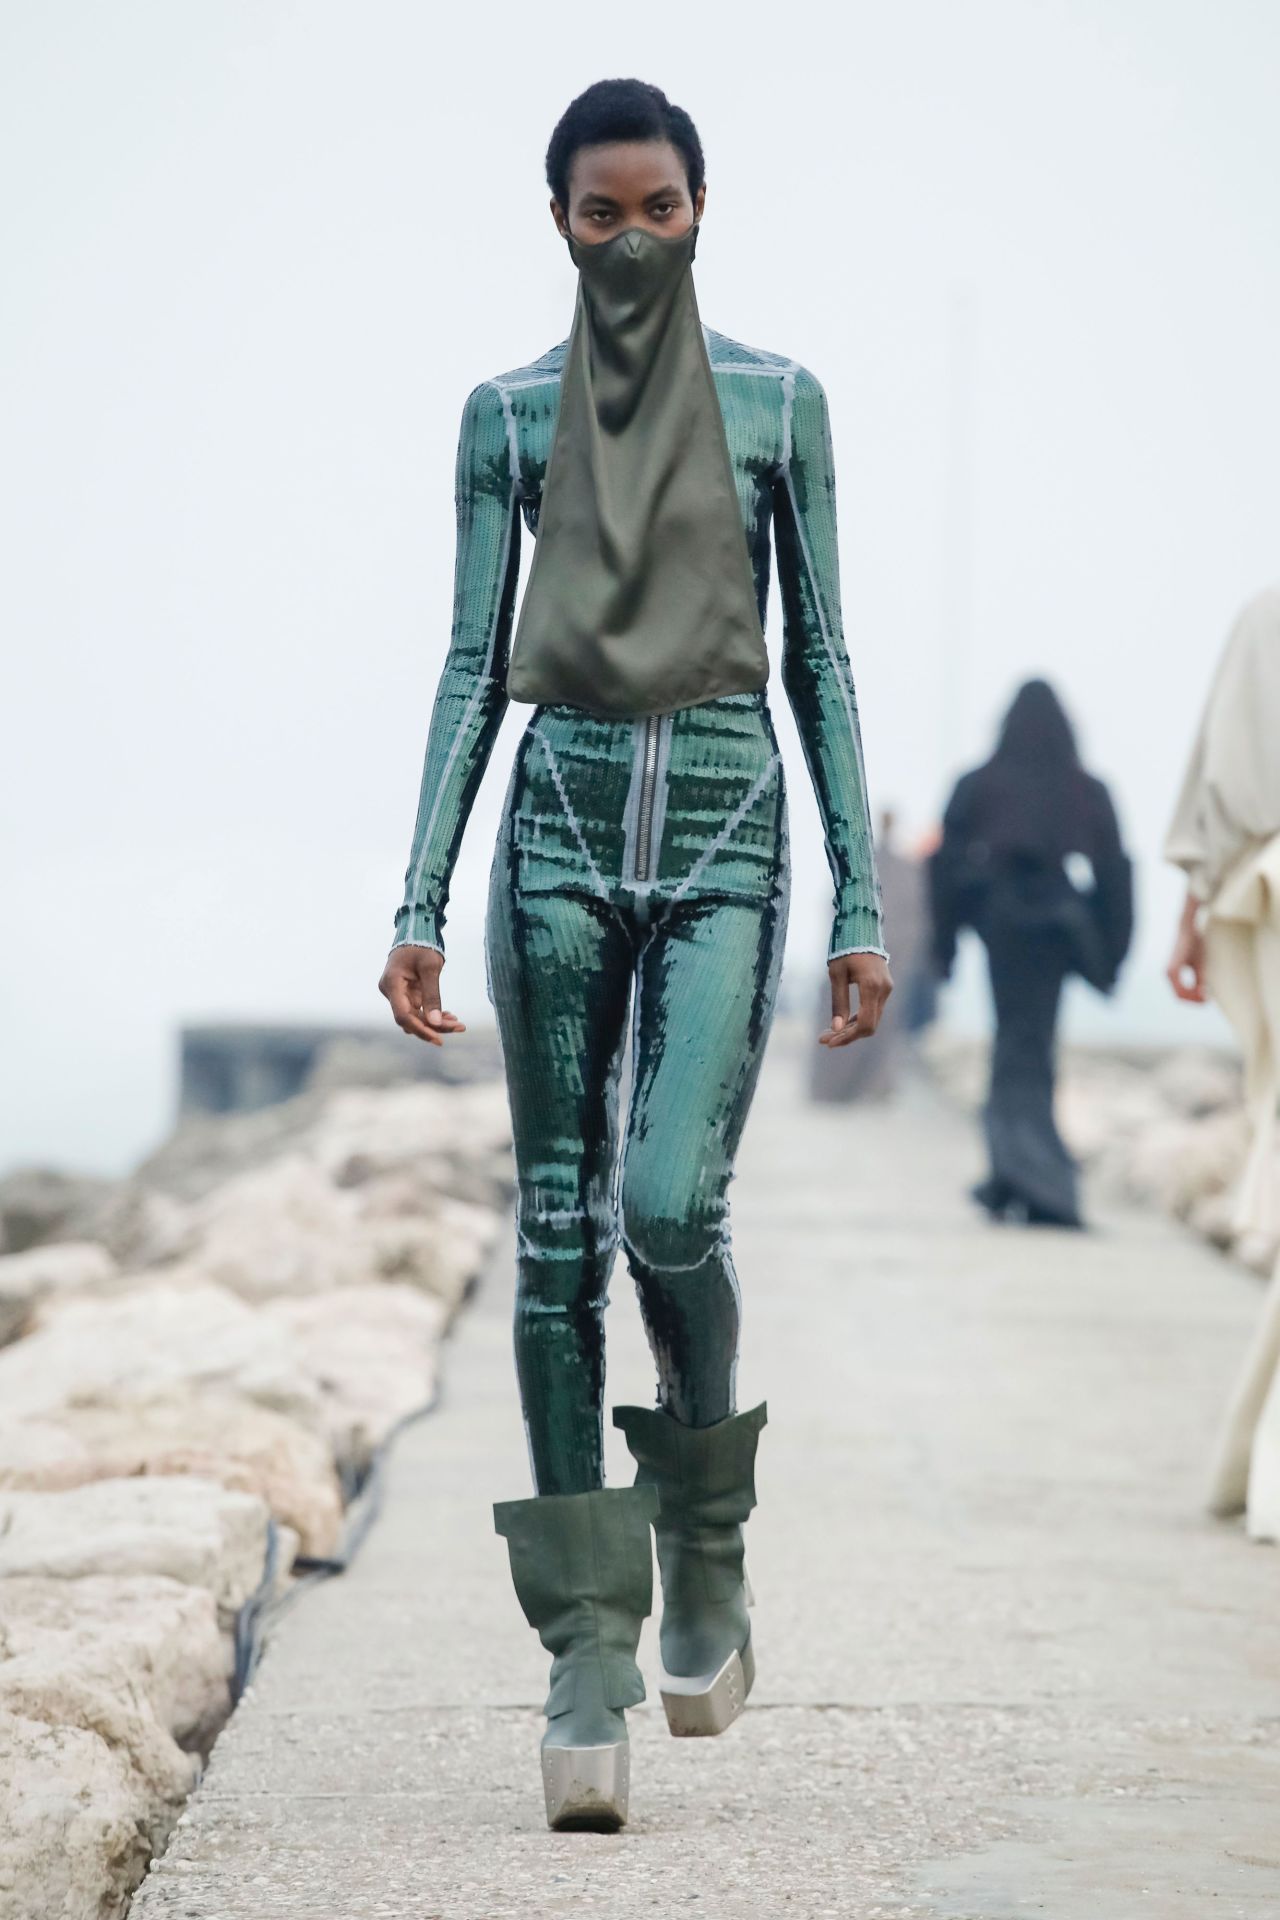 Rick Owens' latest collection featured enormous structured outerwear, masked models and slick, sequin bodysuits.<br />